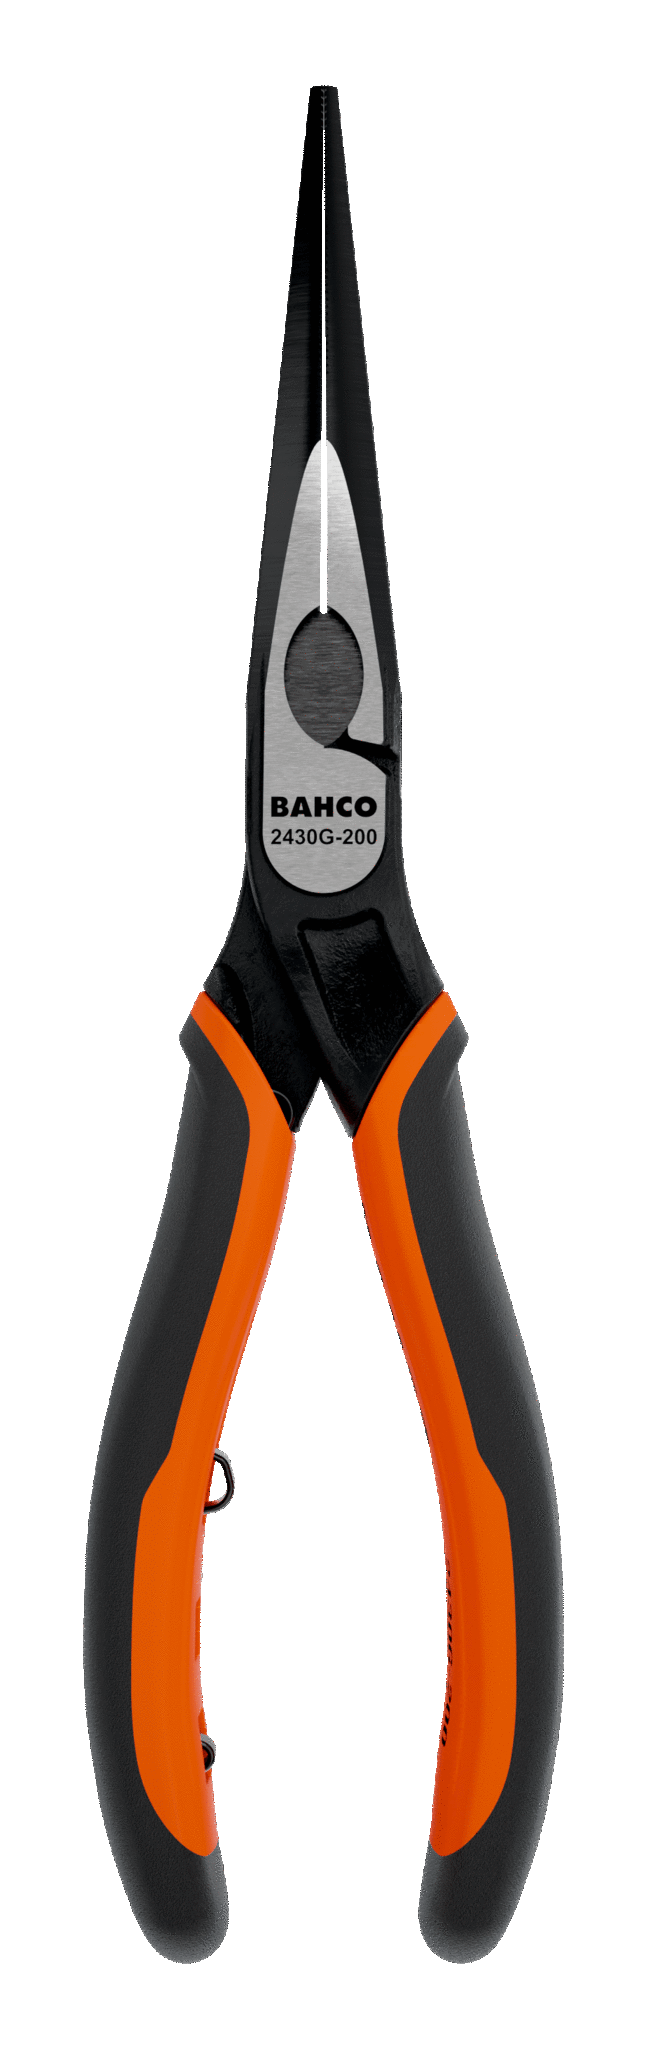 ERGO™ Long Snipe Nose Pliers with Self-Opening Dual-Component Handles and Phosphate Finish - 2430-G-160 by Bahco